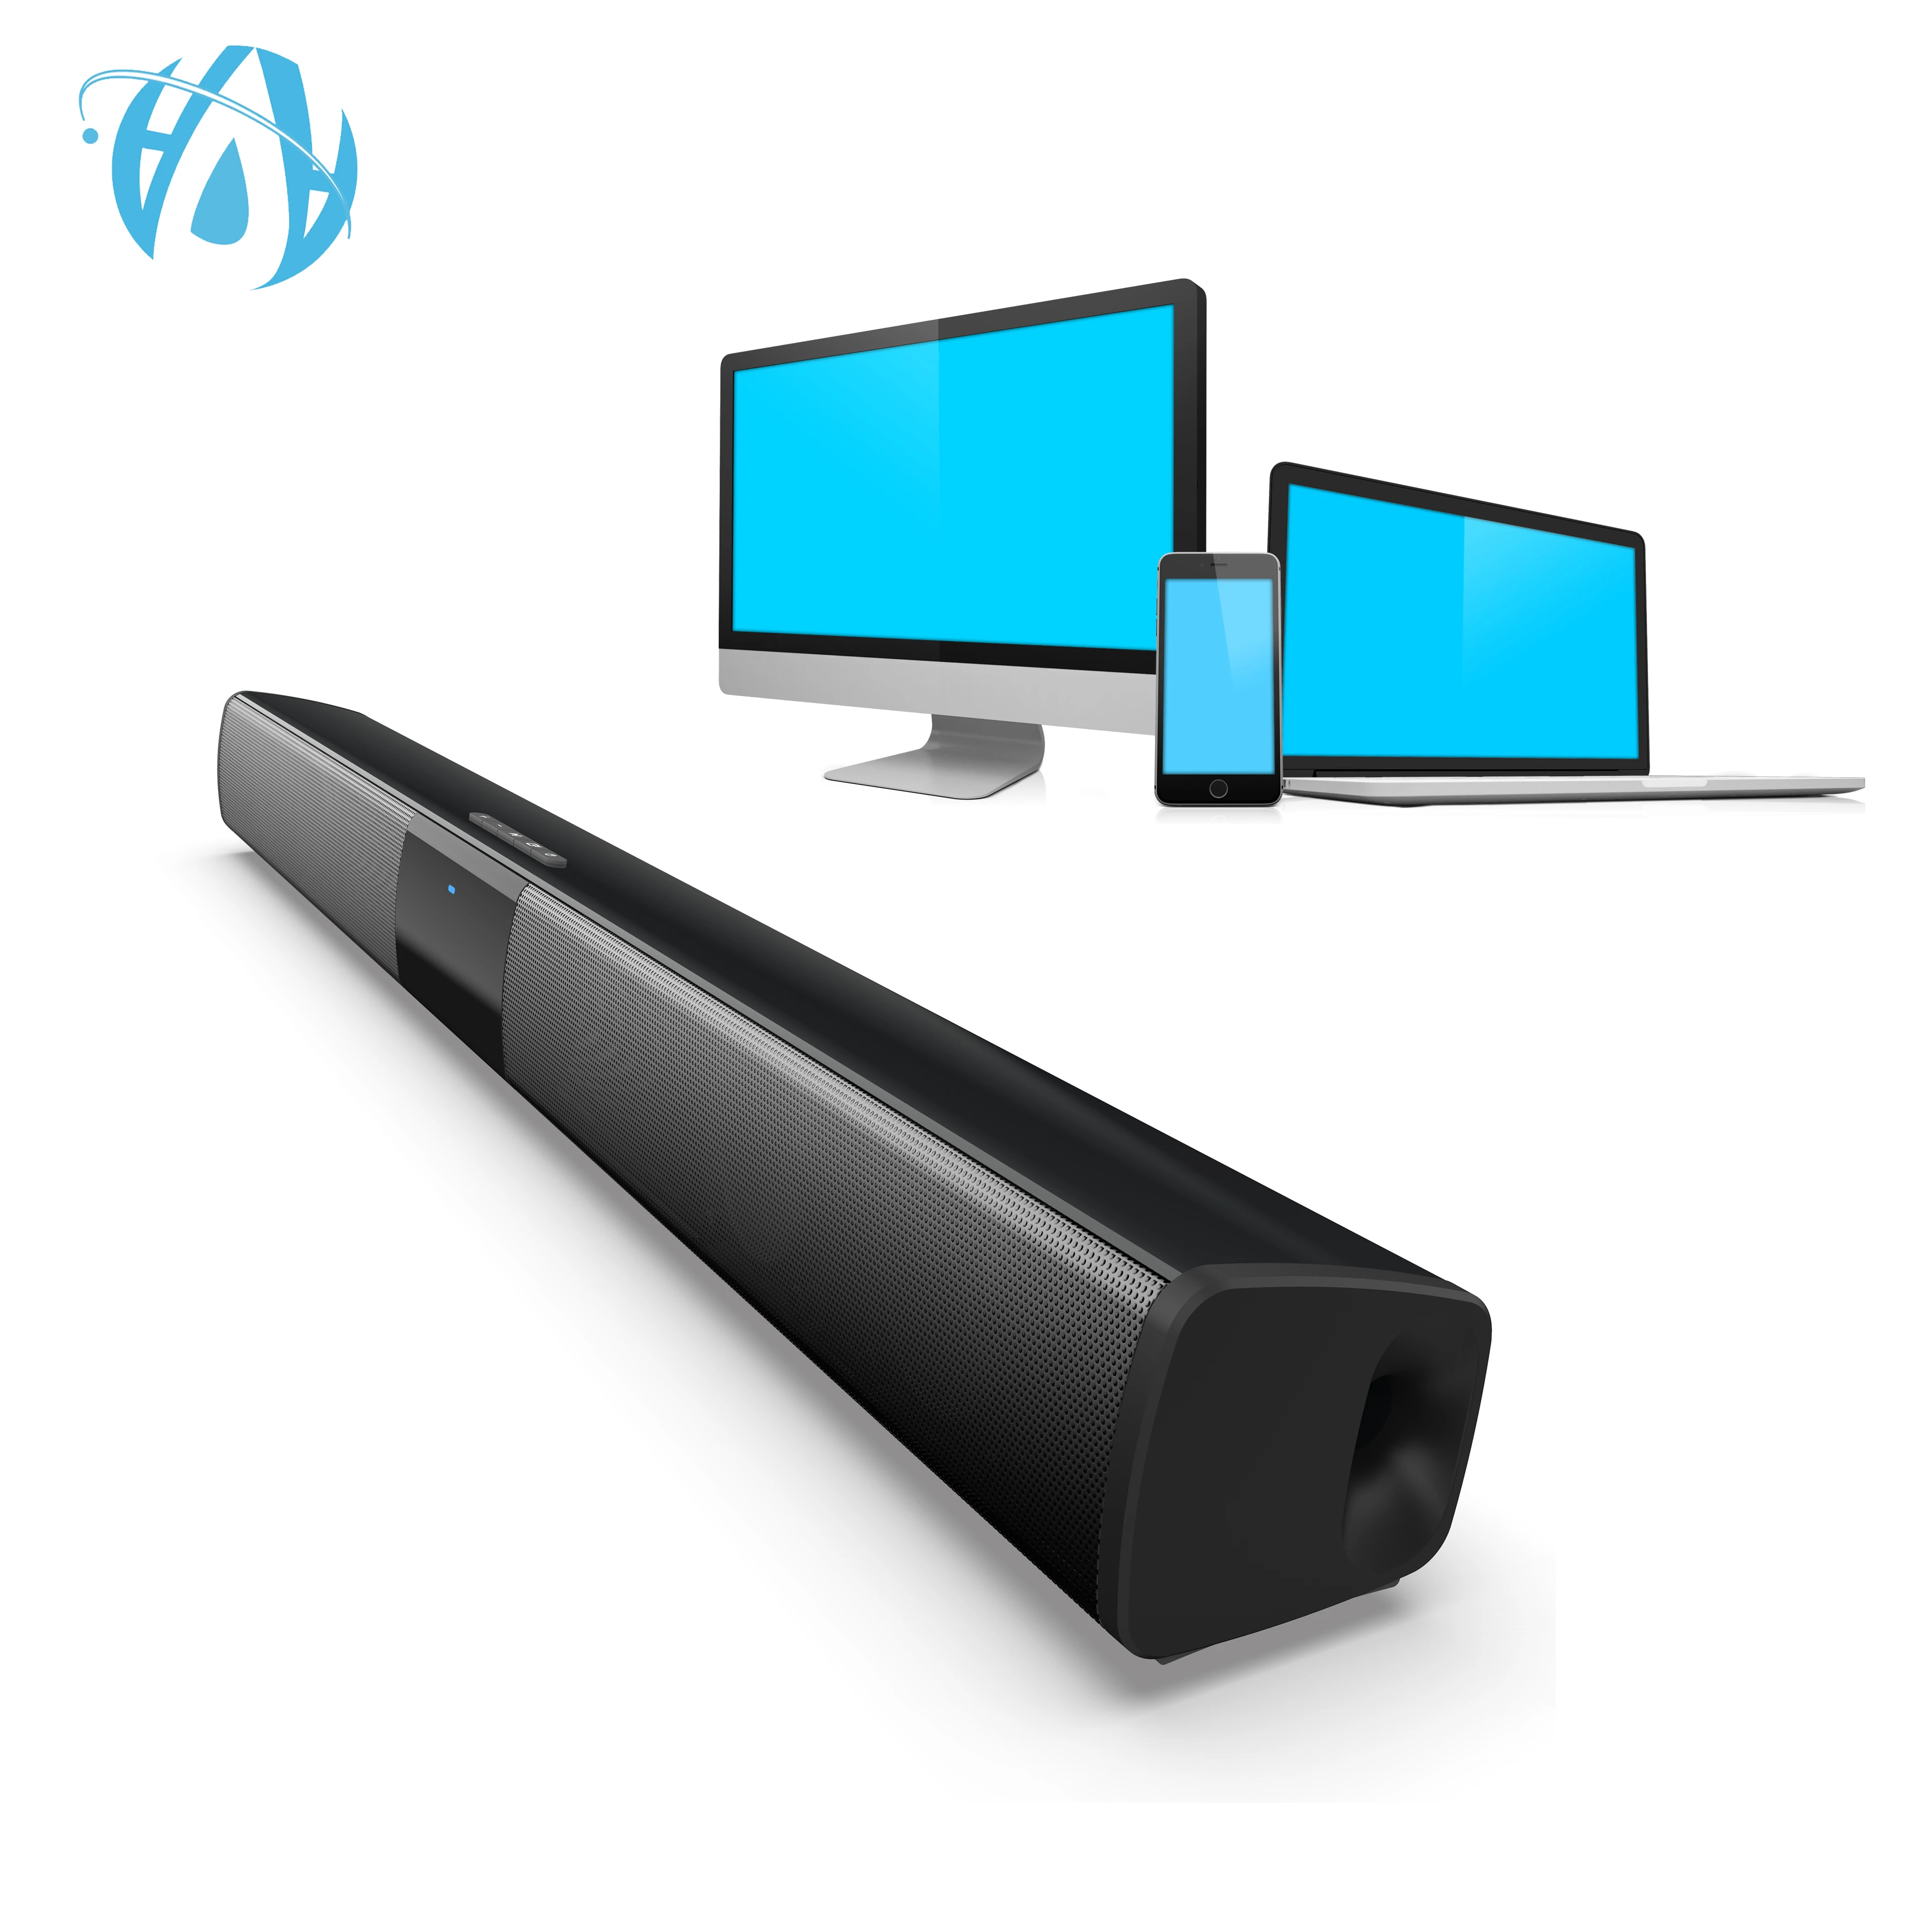 

2019 New Arrival 20W Bass Stereo Bluetooth TV Soundbar Speaker for Home Theatre Wireless with 4 speakers, Black